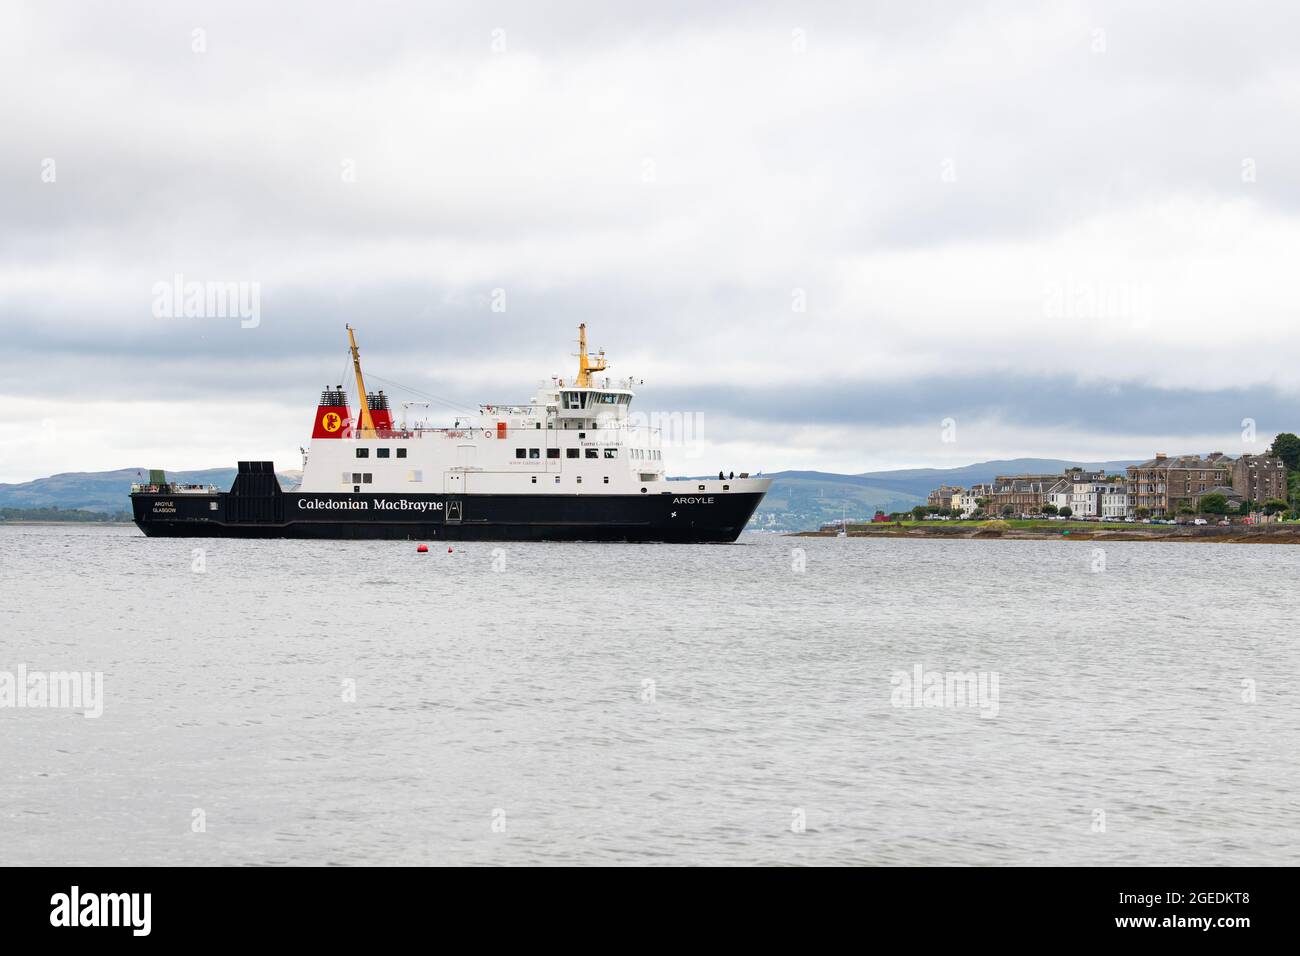 Calmac ferry 'Argyle' arriving at Rothesay, Isle of Bute on the Wemyss Bay Rothesay crossing, Argyll and Bute, Scotland, UK Stock Photo